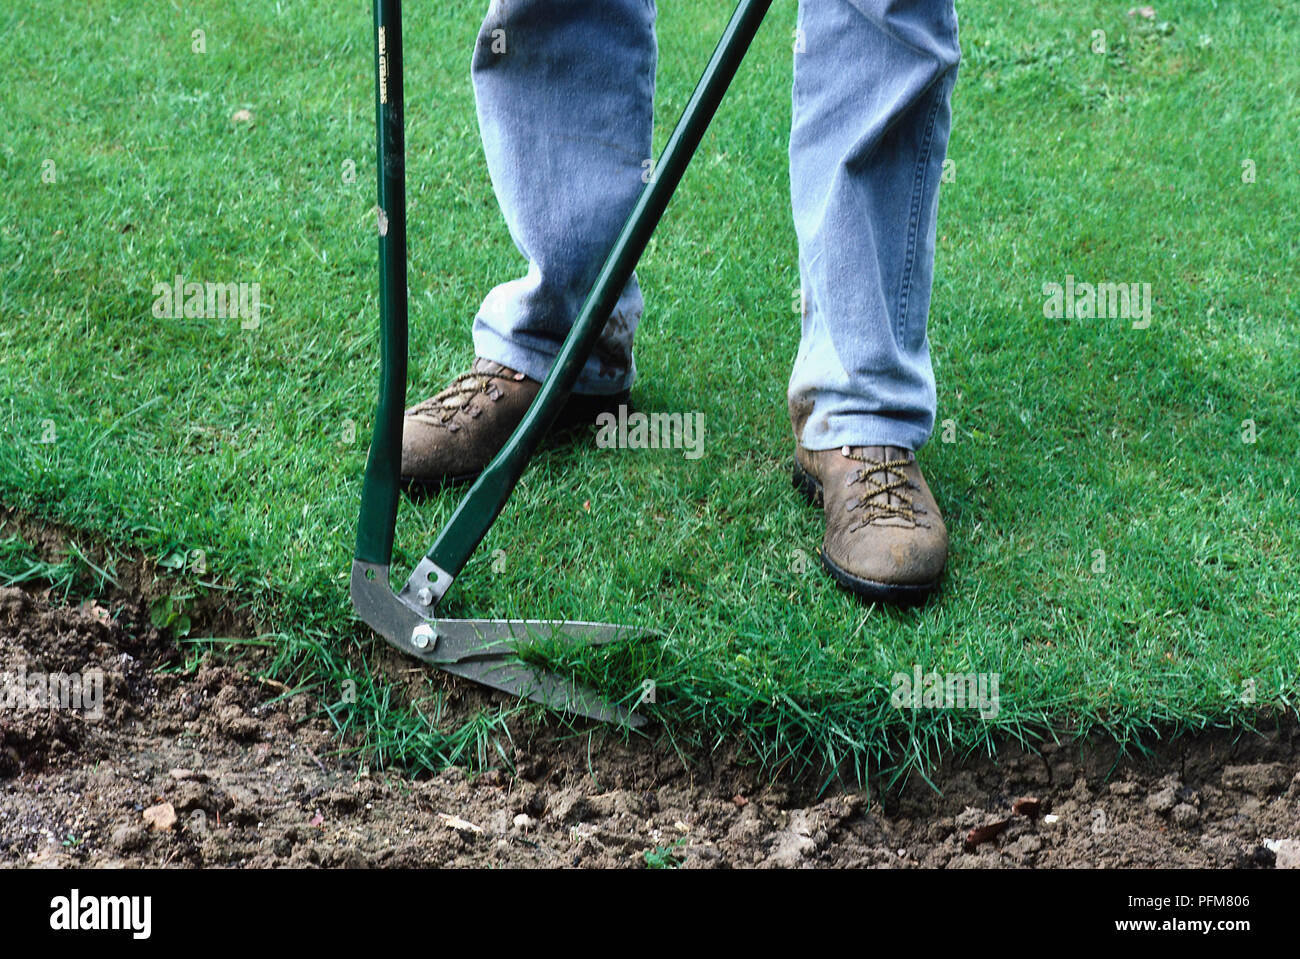 Man trimming the edges of a lawn with long-handled shears. Stock Photo